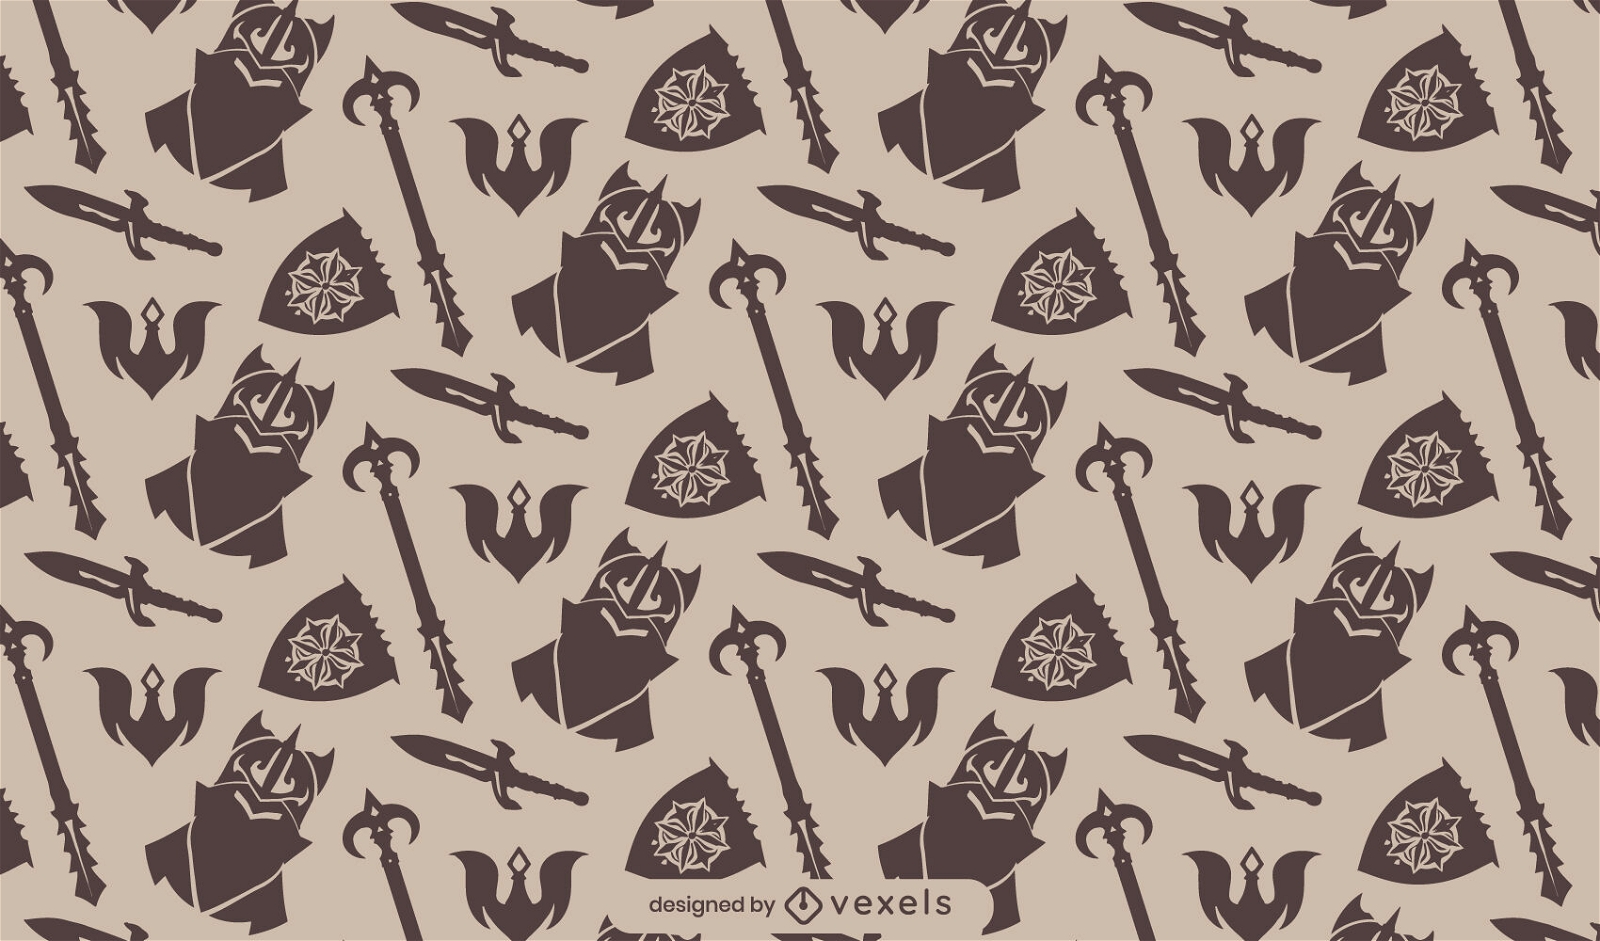 Knight, swords and shields pattern design